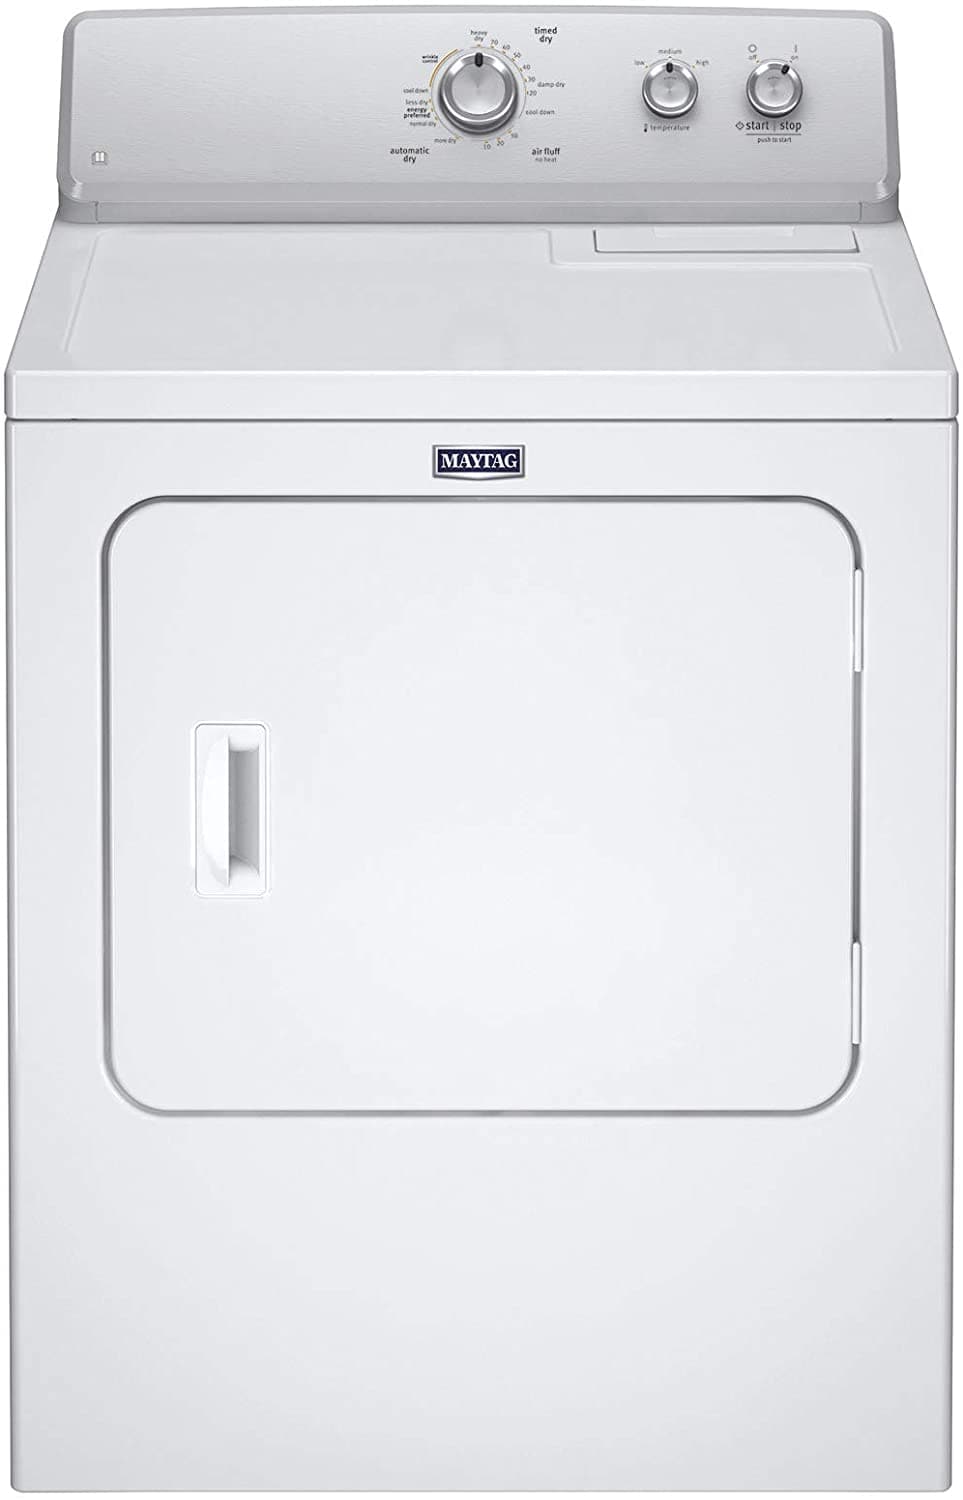 Maytag 10.5Kg Tumble Dryer, 3LMEDC315FW(MADE IN USA)